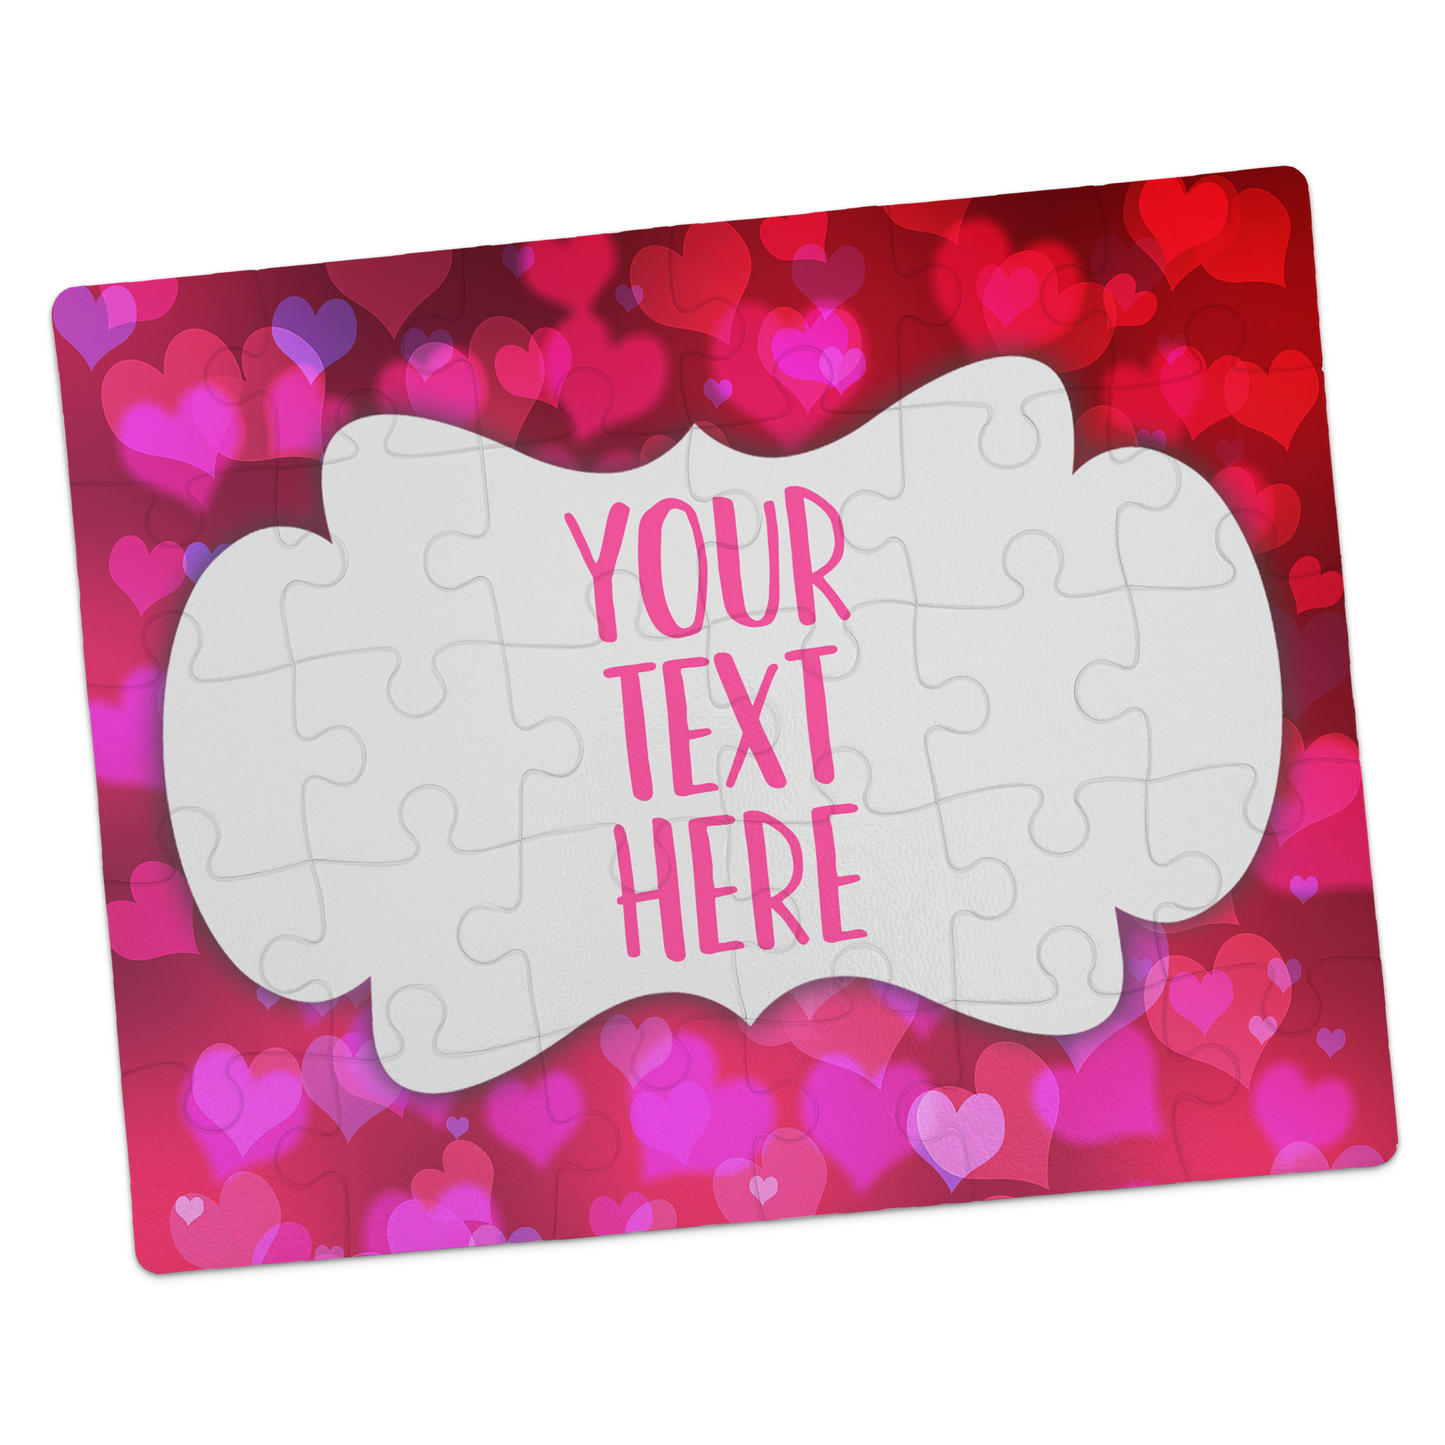 Create Your Own Puzzle - Heart Design - CYOP0165